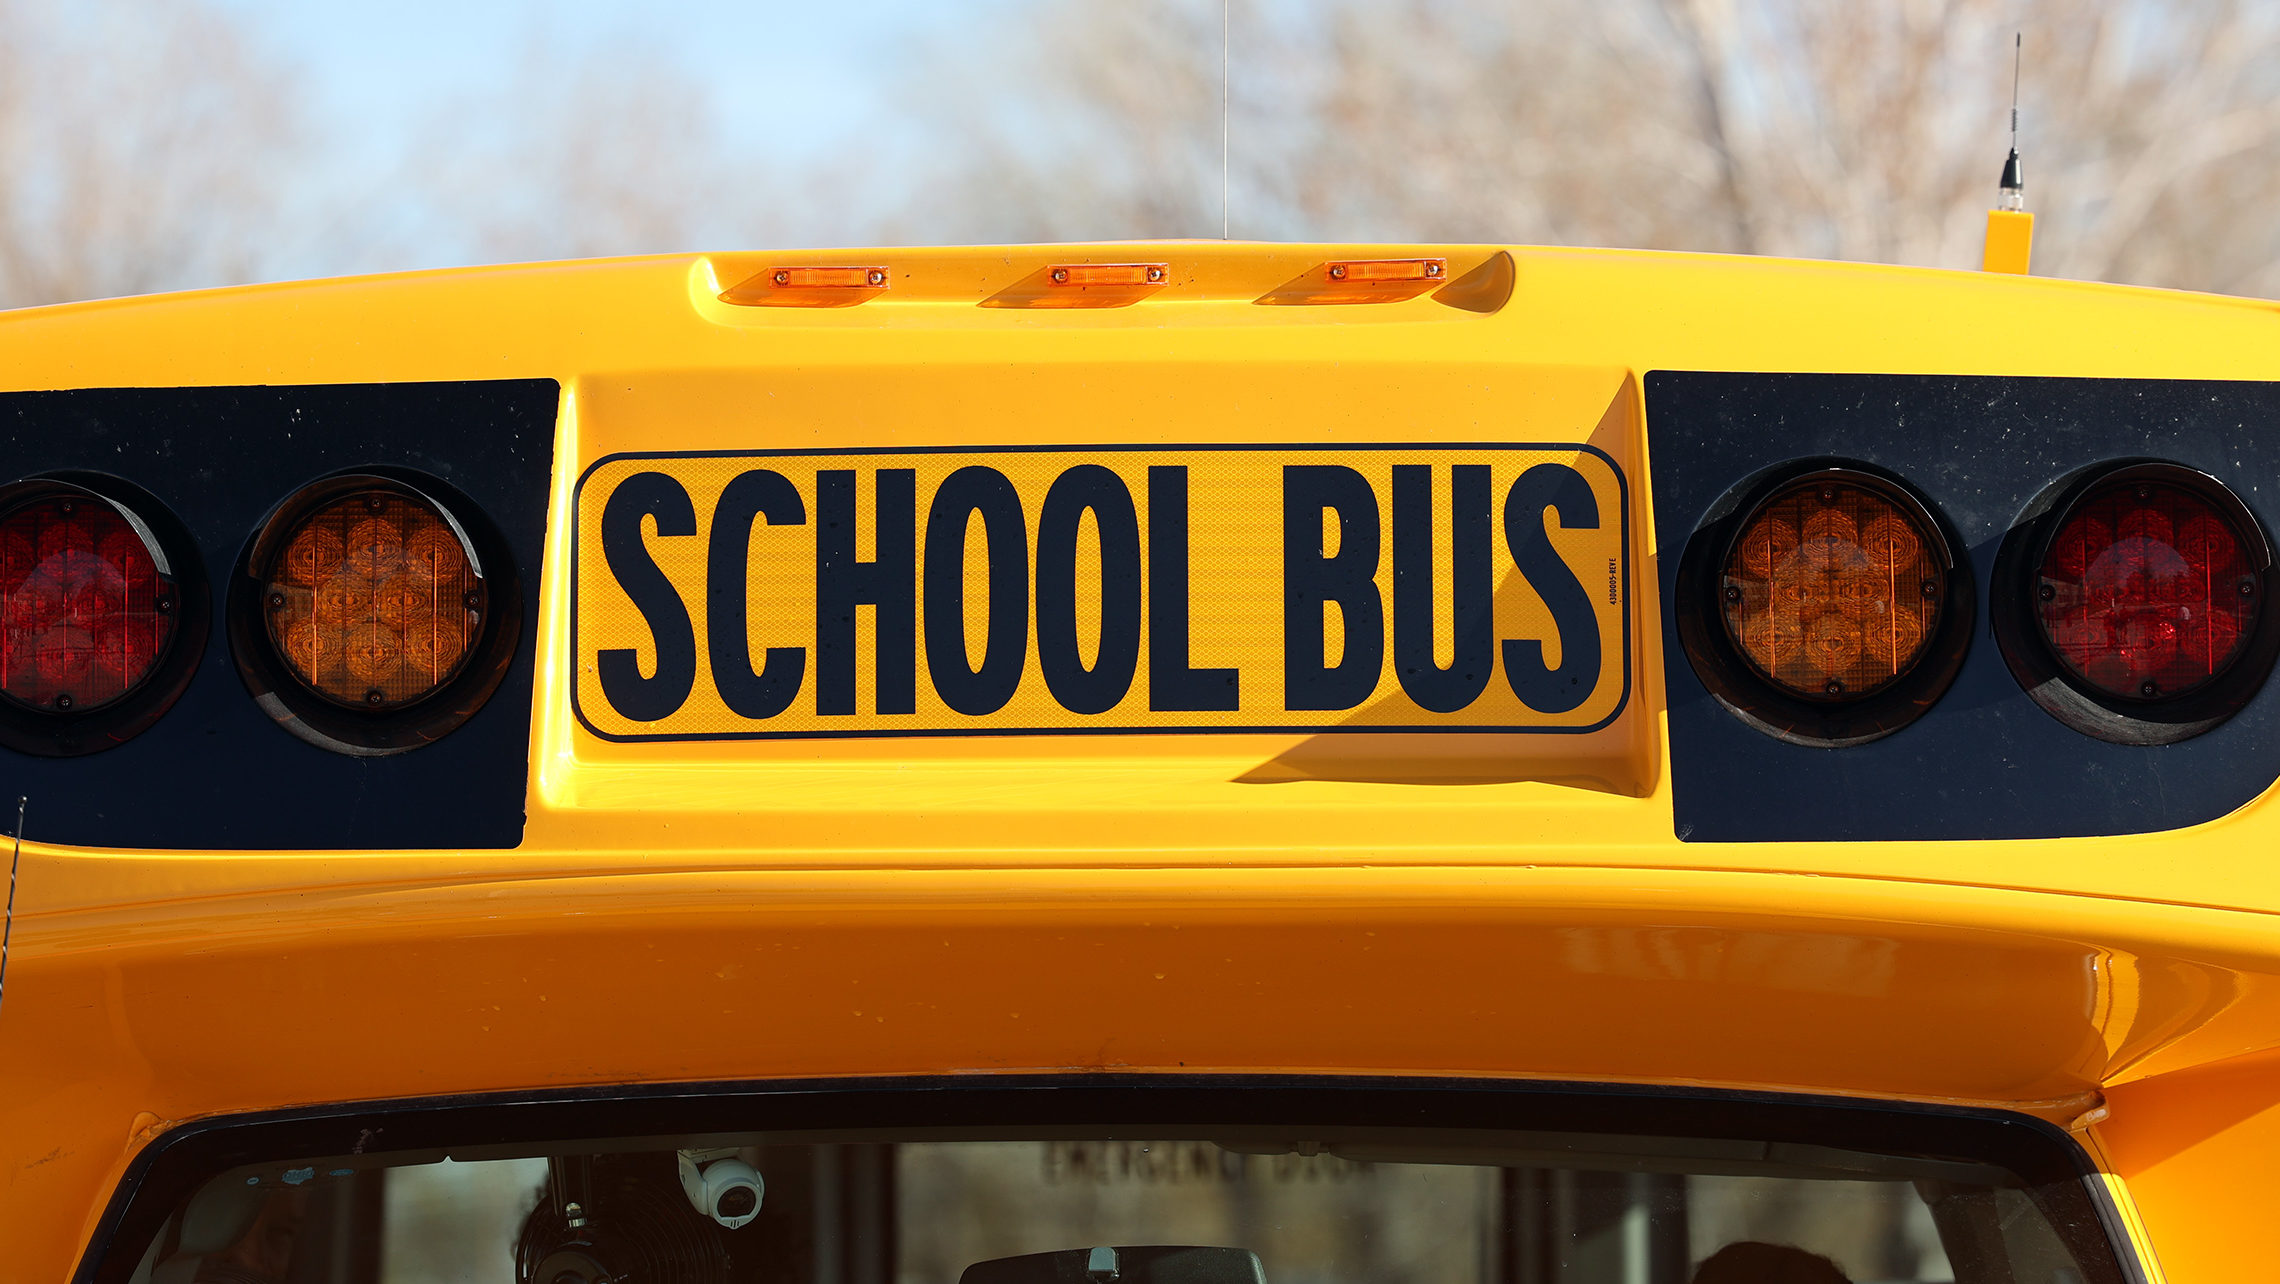 According to Rex Brimhall, Director of Transportation for Alpine School District, yesterday a bus d...